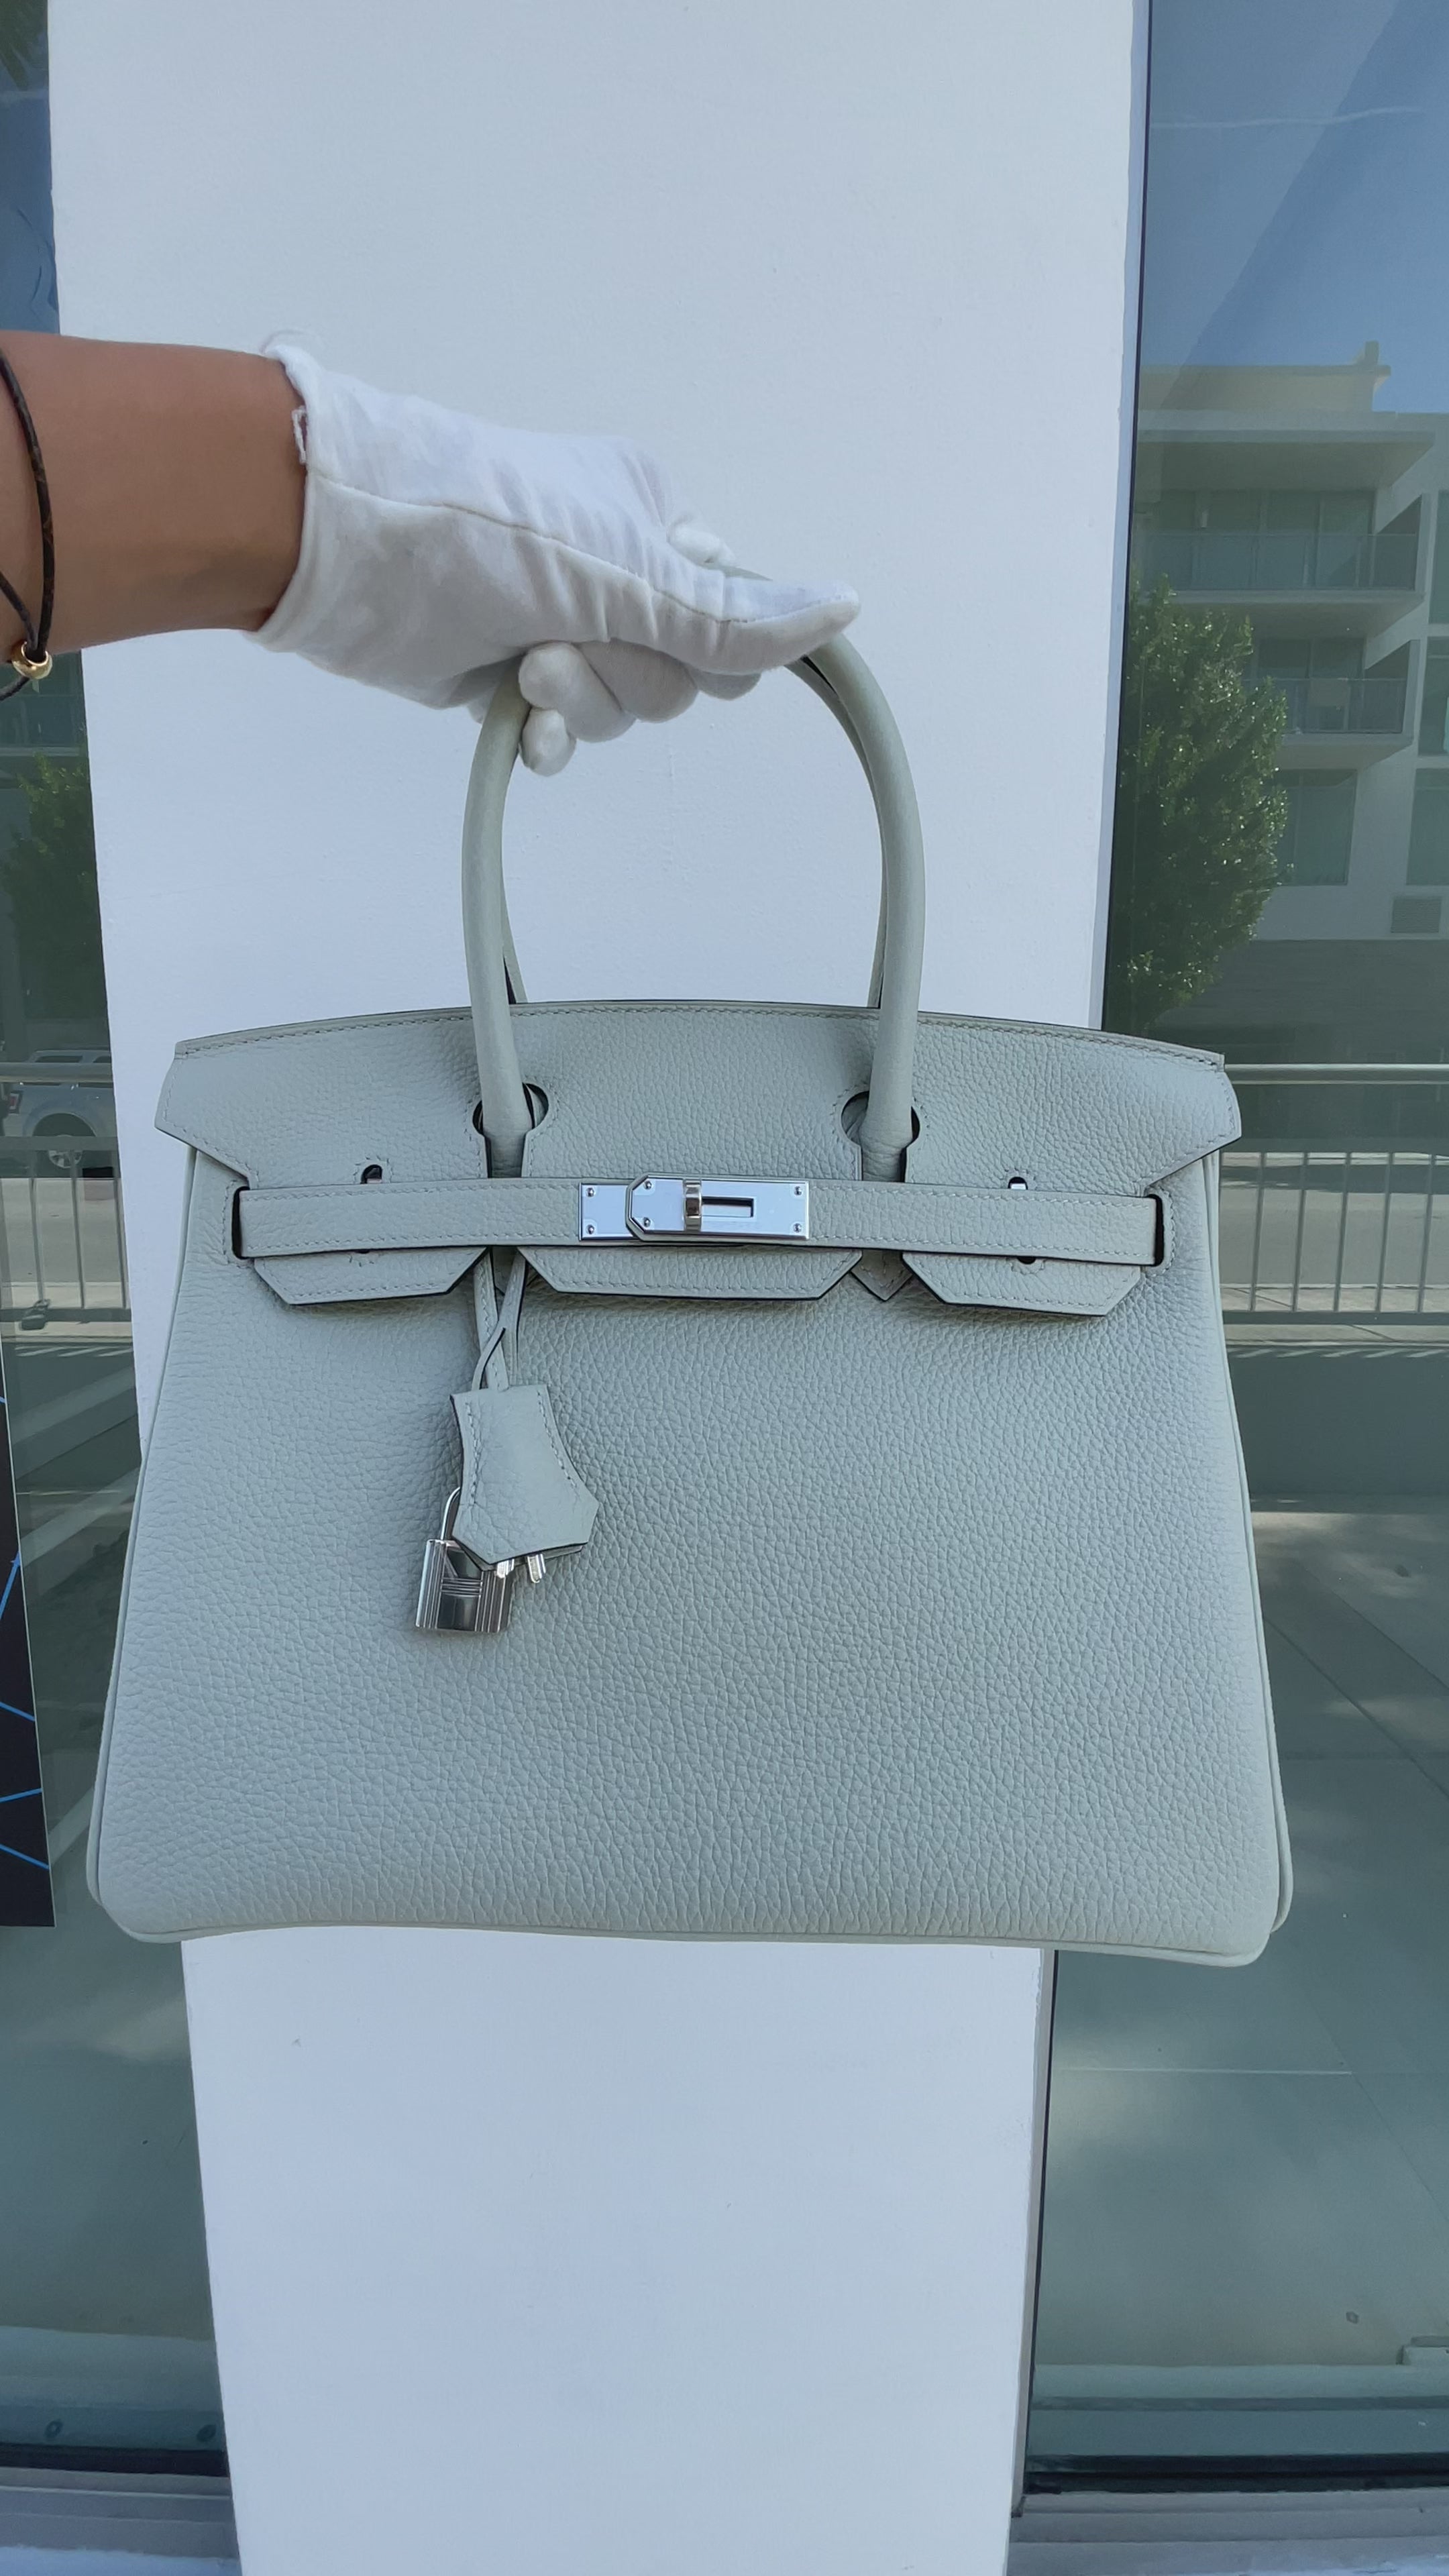 Hermes Birkin 30 In Gris Neve Togo Leather With Gold Hardware